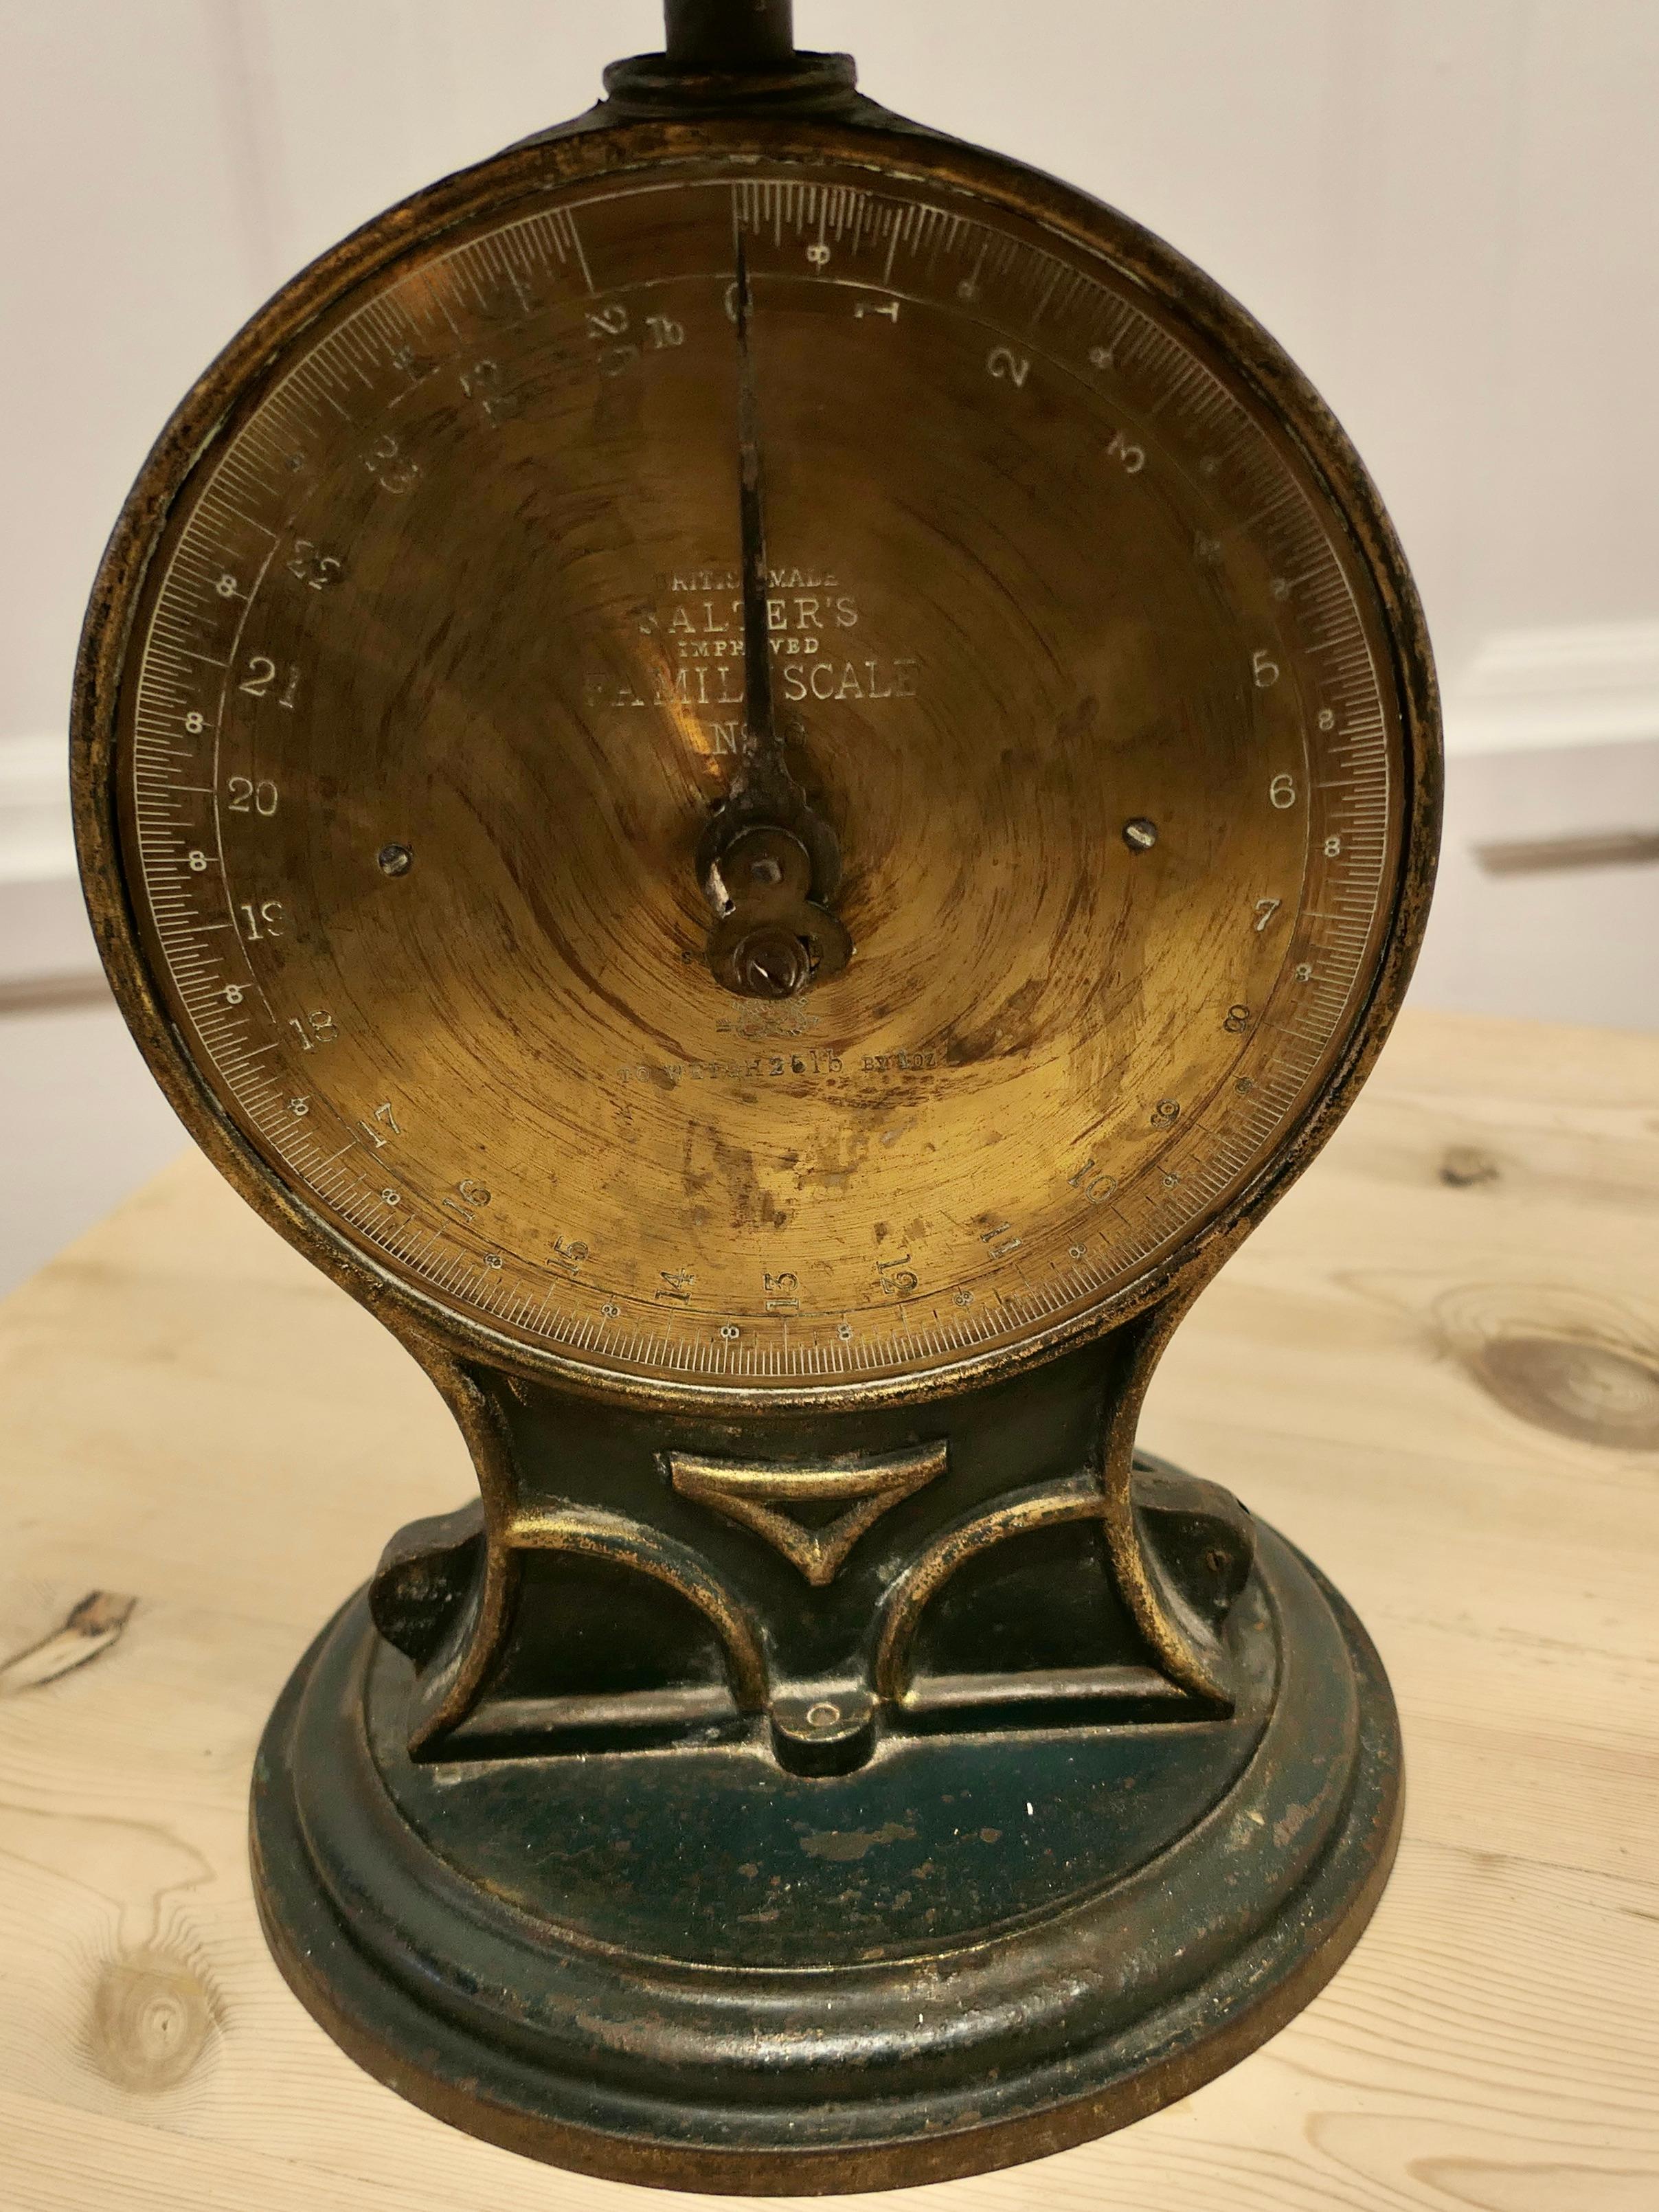 salters family scale no 50